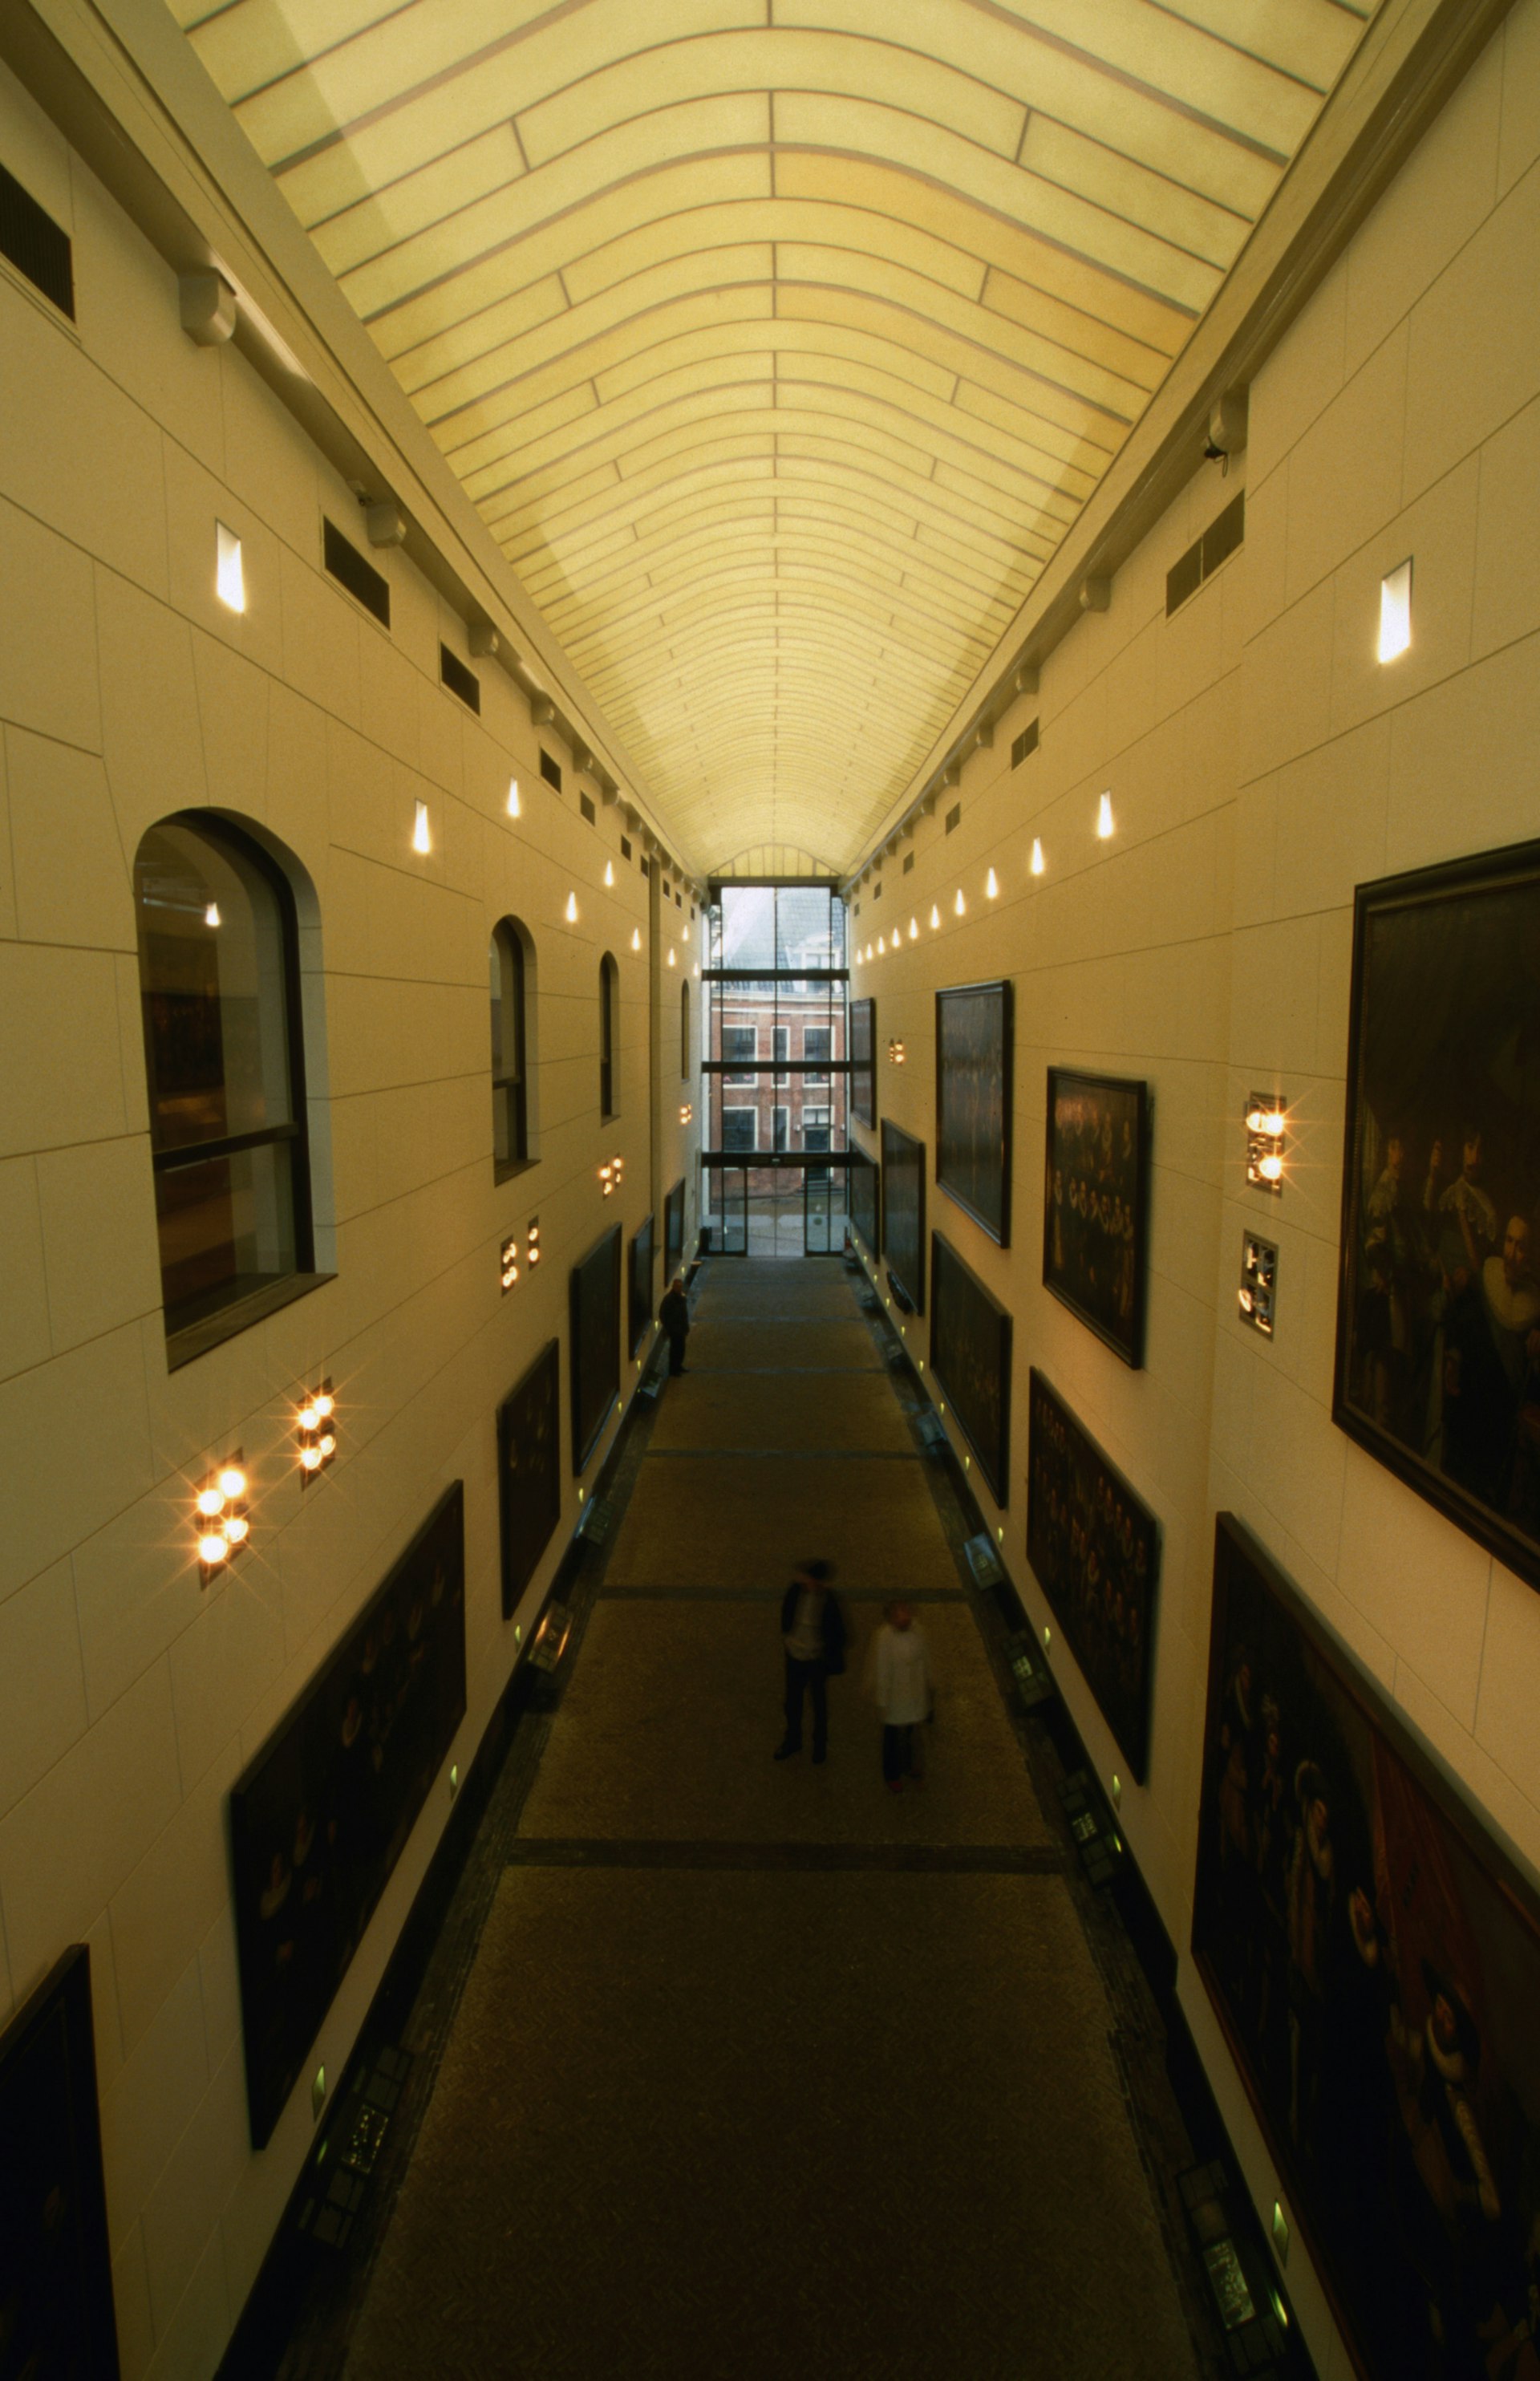 A shot downwards of a long hallway lined with paintings